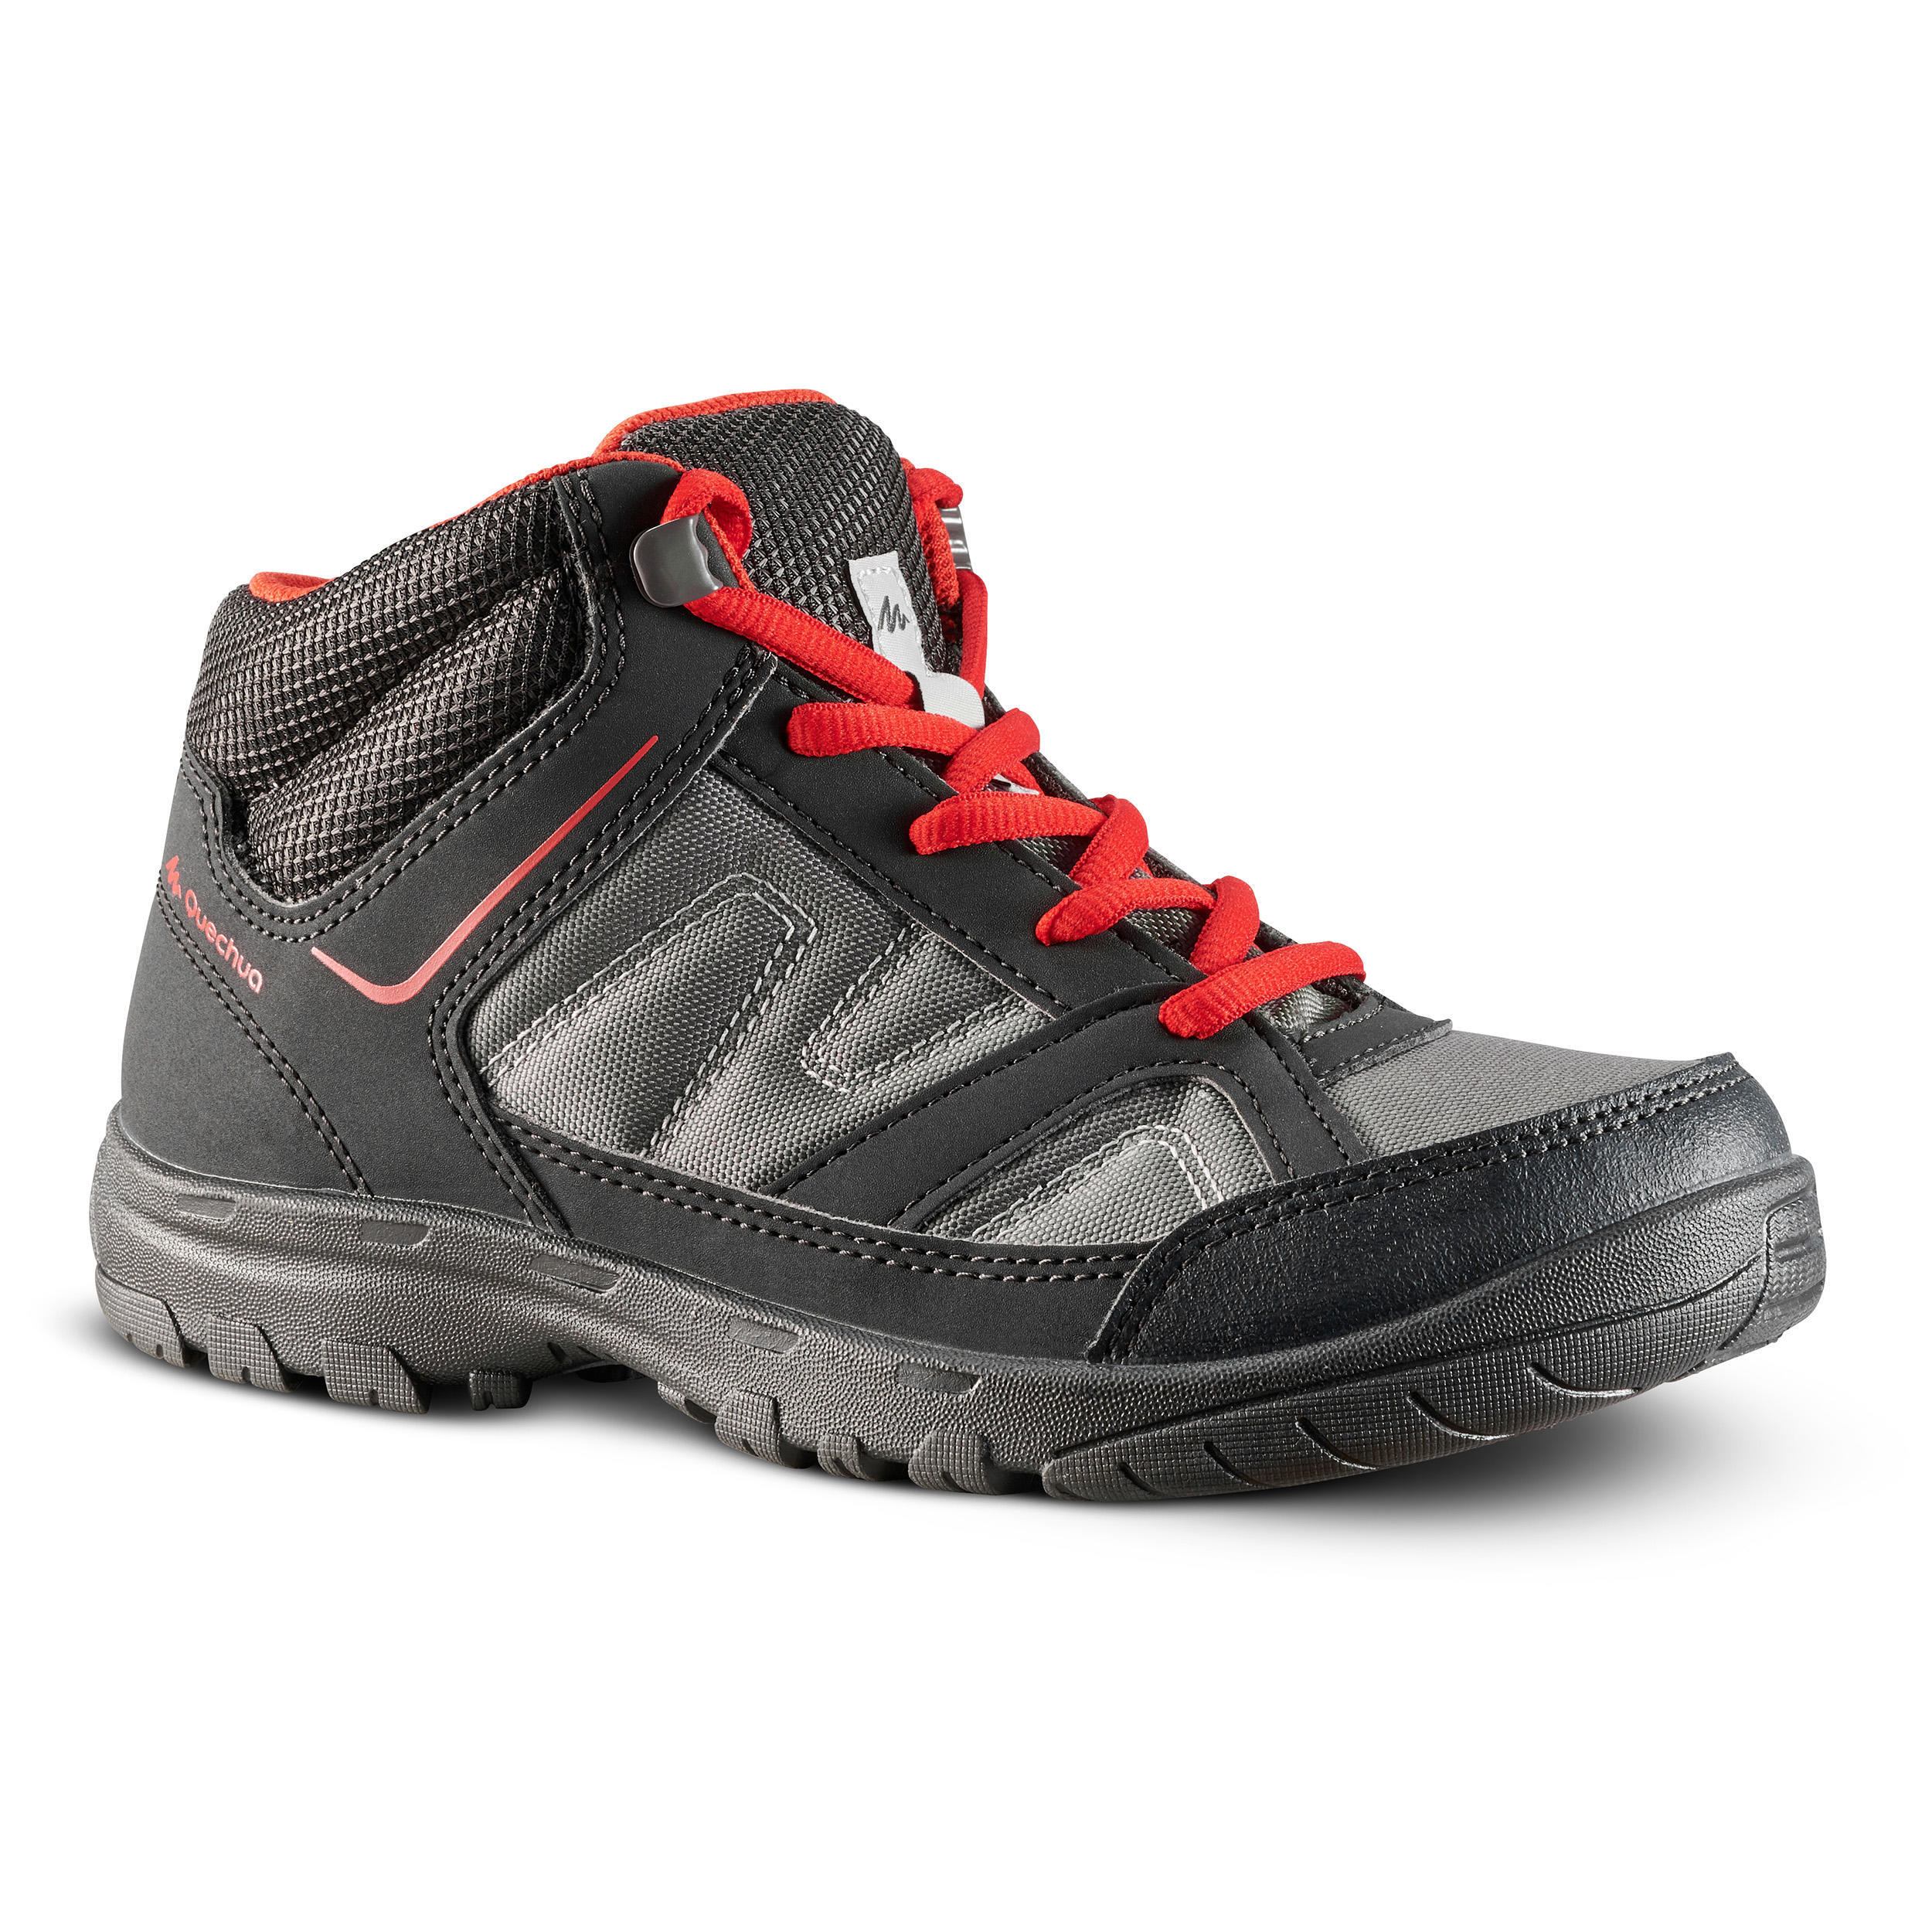 Kids Hiking Boots 35 TO 38 Mid JR MH100 - Black/Red 1/6